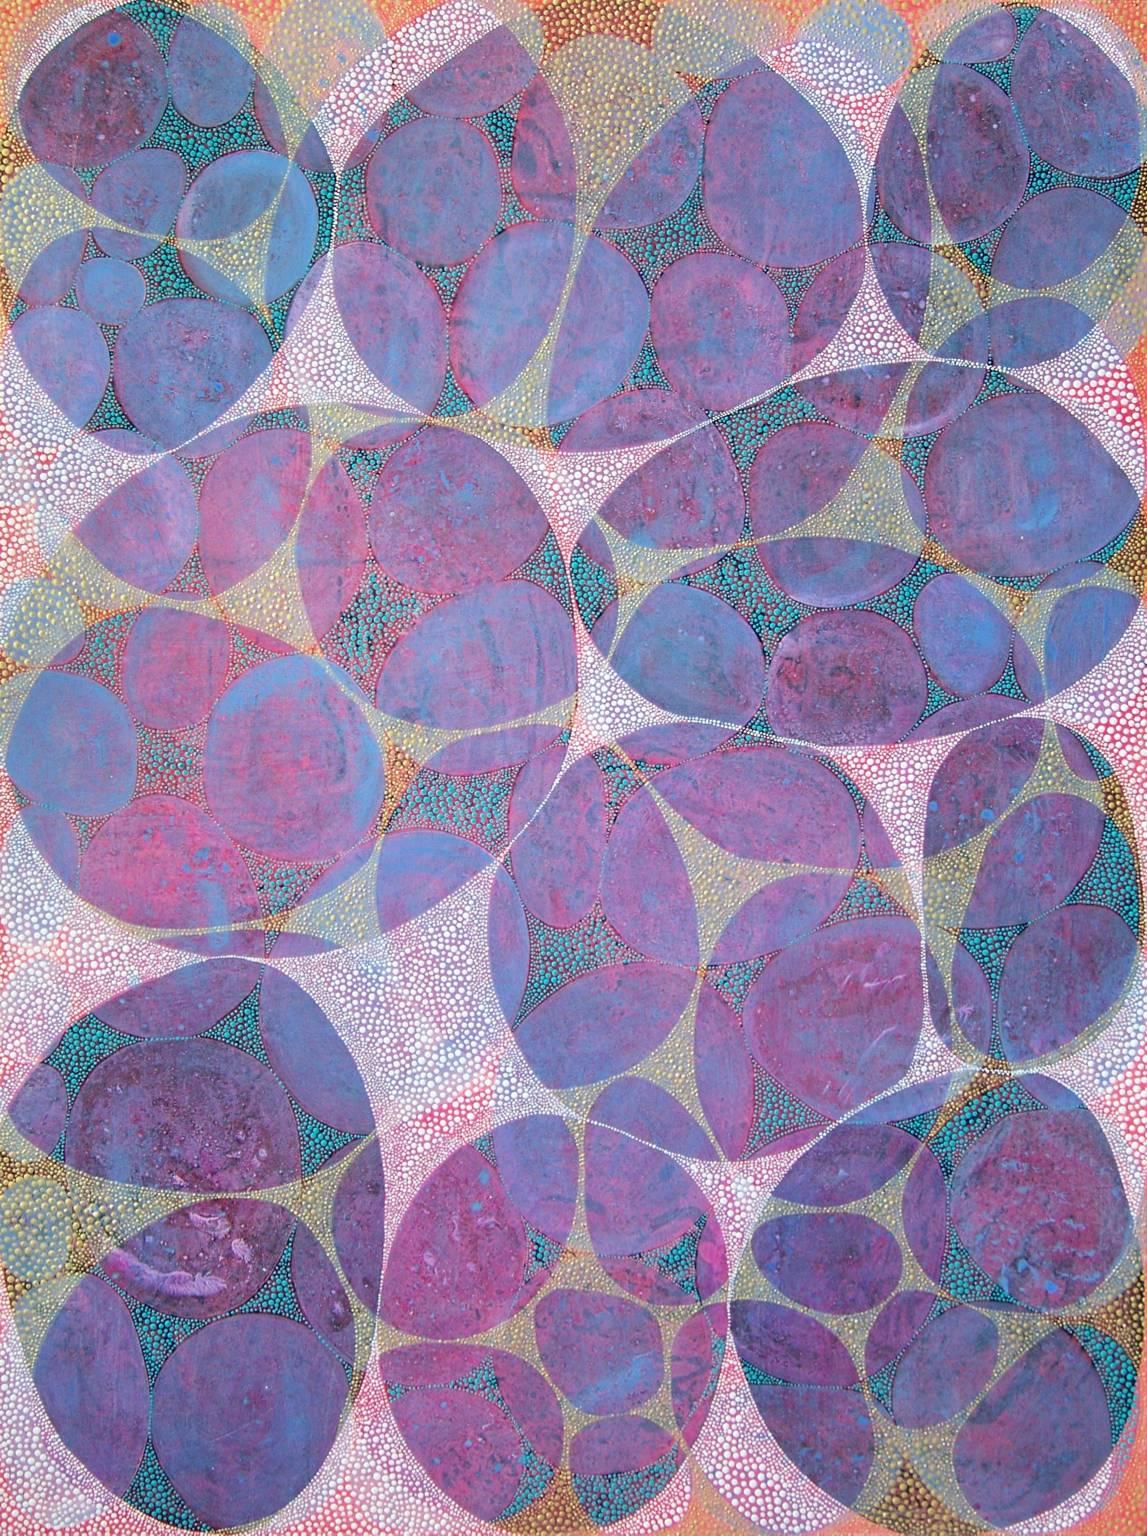 Denise Driscoll Abstract Painting – „Entanglement 3“, abstraktes, violettes, blaues, tealfarbenes, rotes, goldenes Acrylgemälde